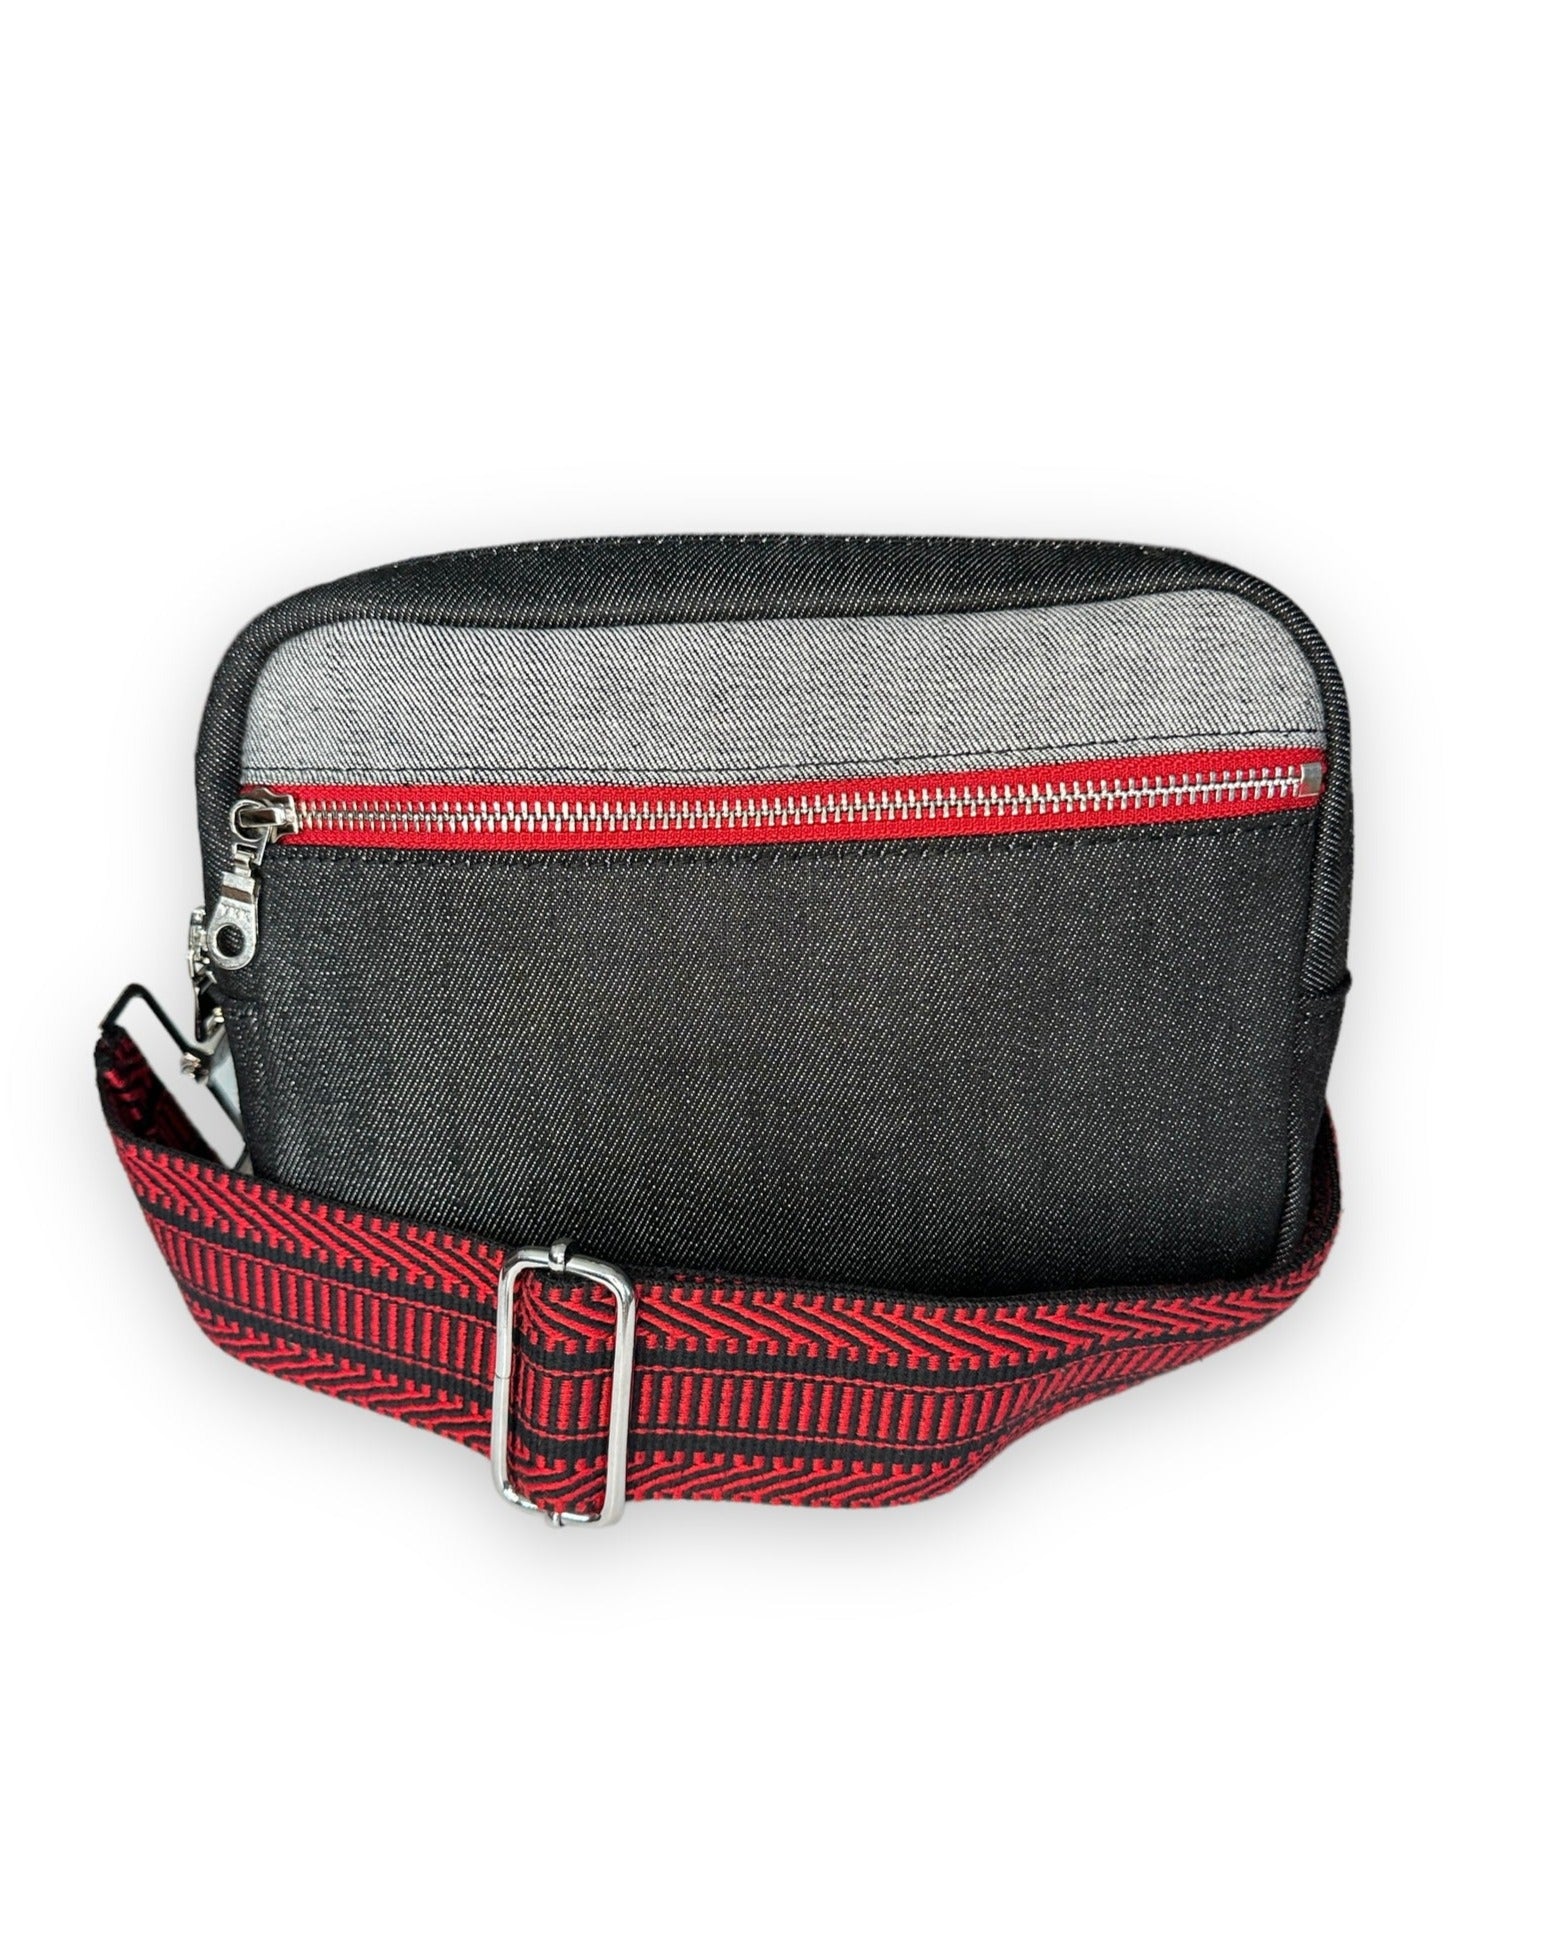 Sling Bag- The ideal travel bag for travel, commuting and everyday adventures